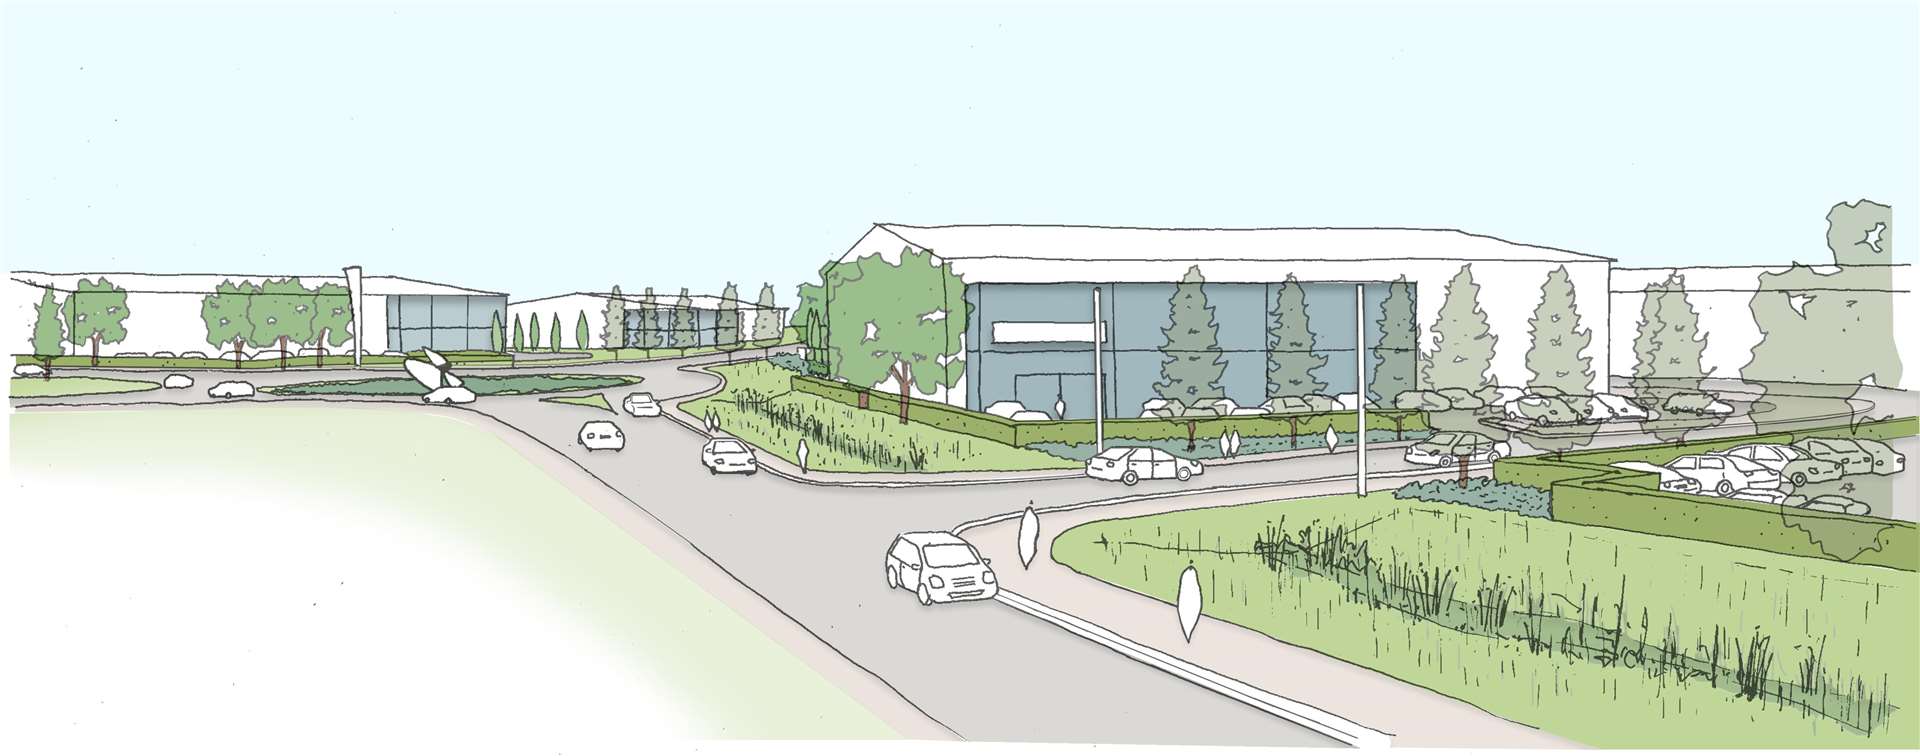 Artists impressions of the site